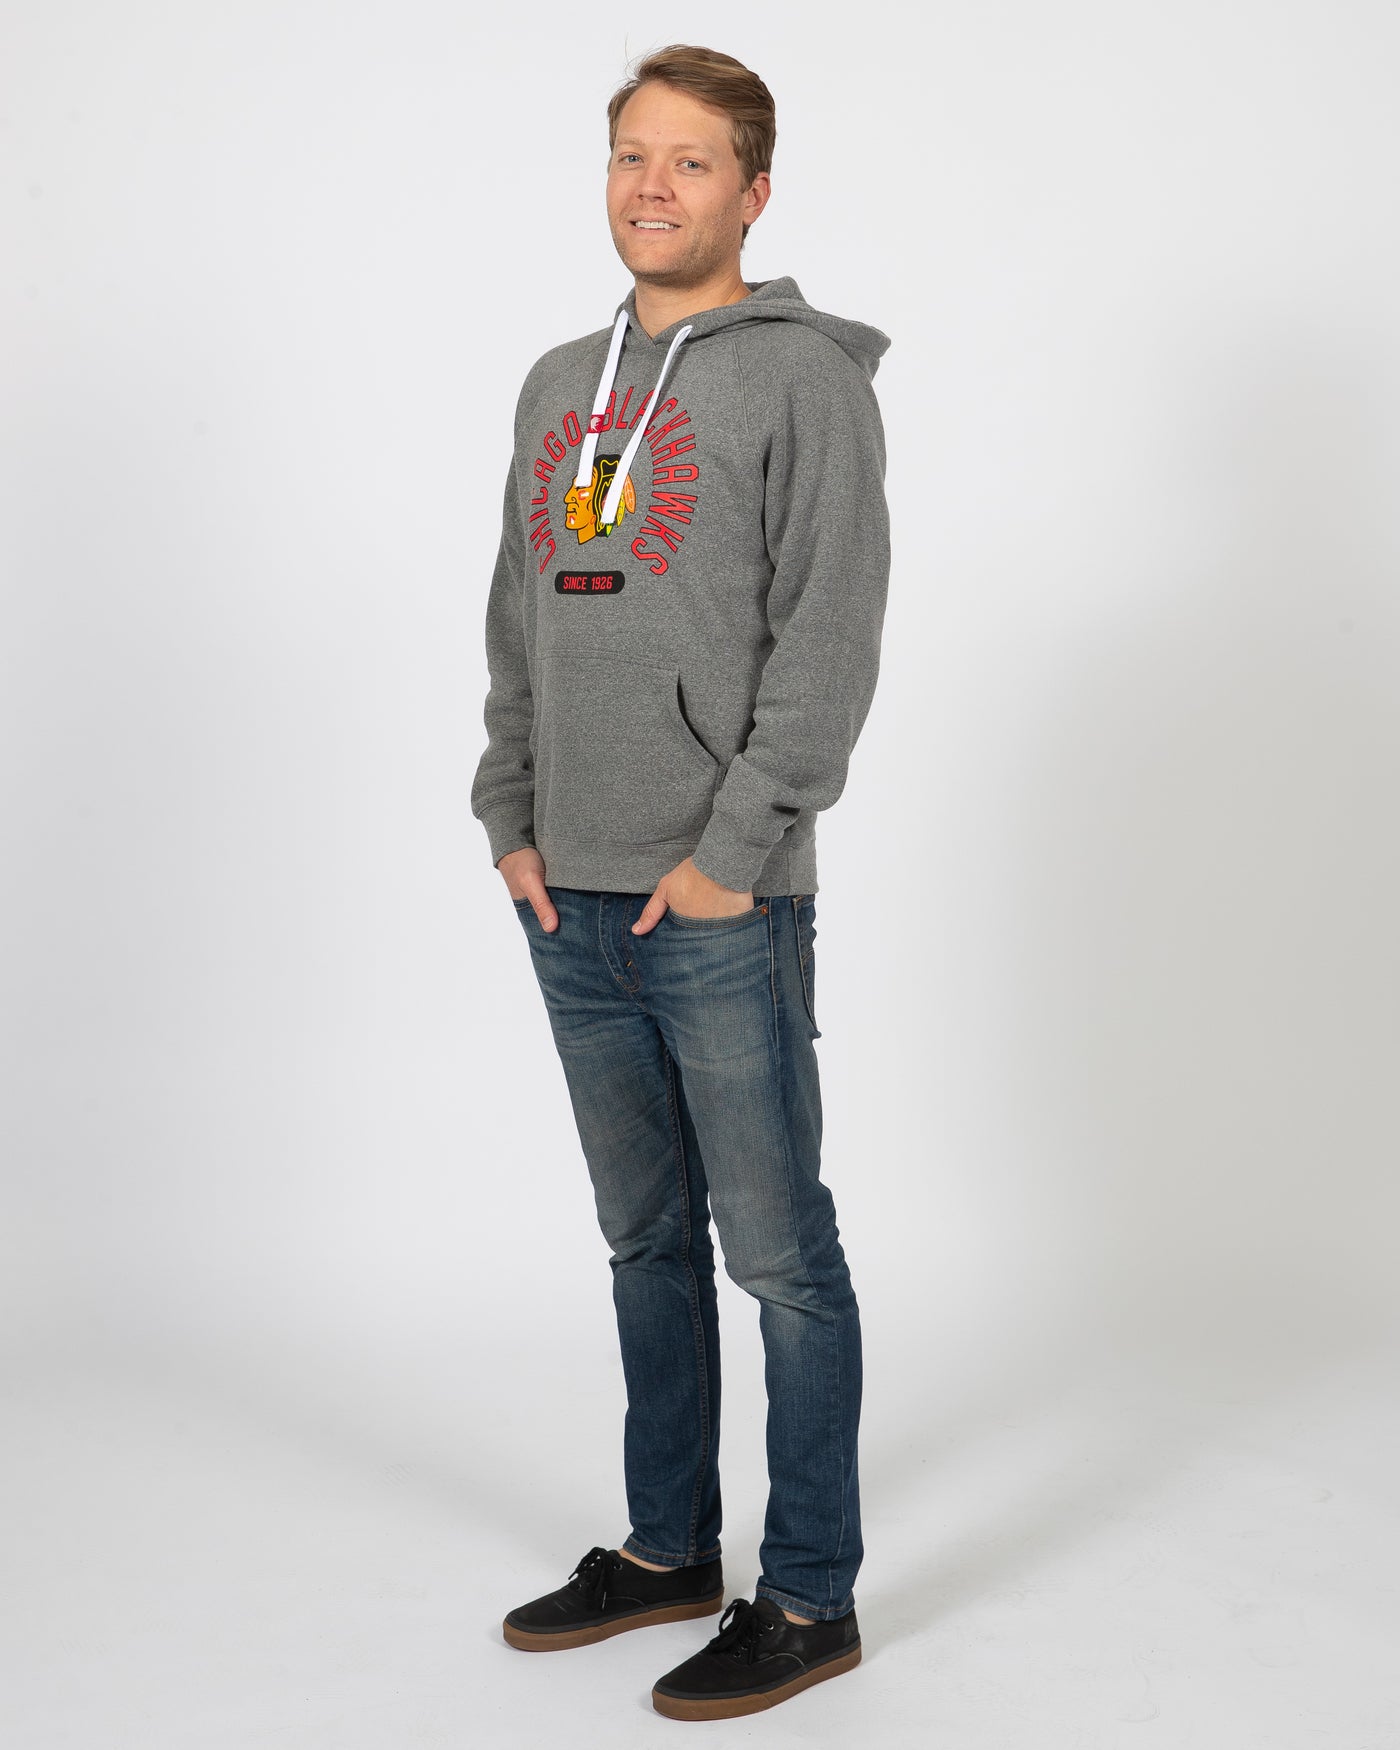 Sportiqe grey Chicago Blackhawks hoodie with primary logo and wordmark graphic on center chest - men's front view